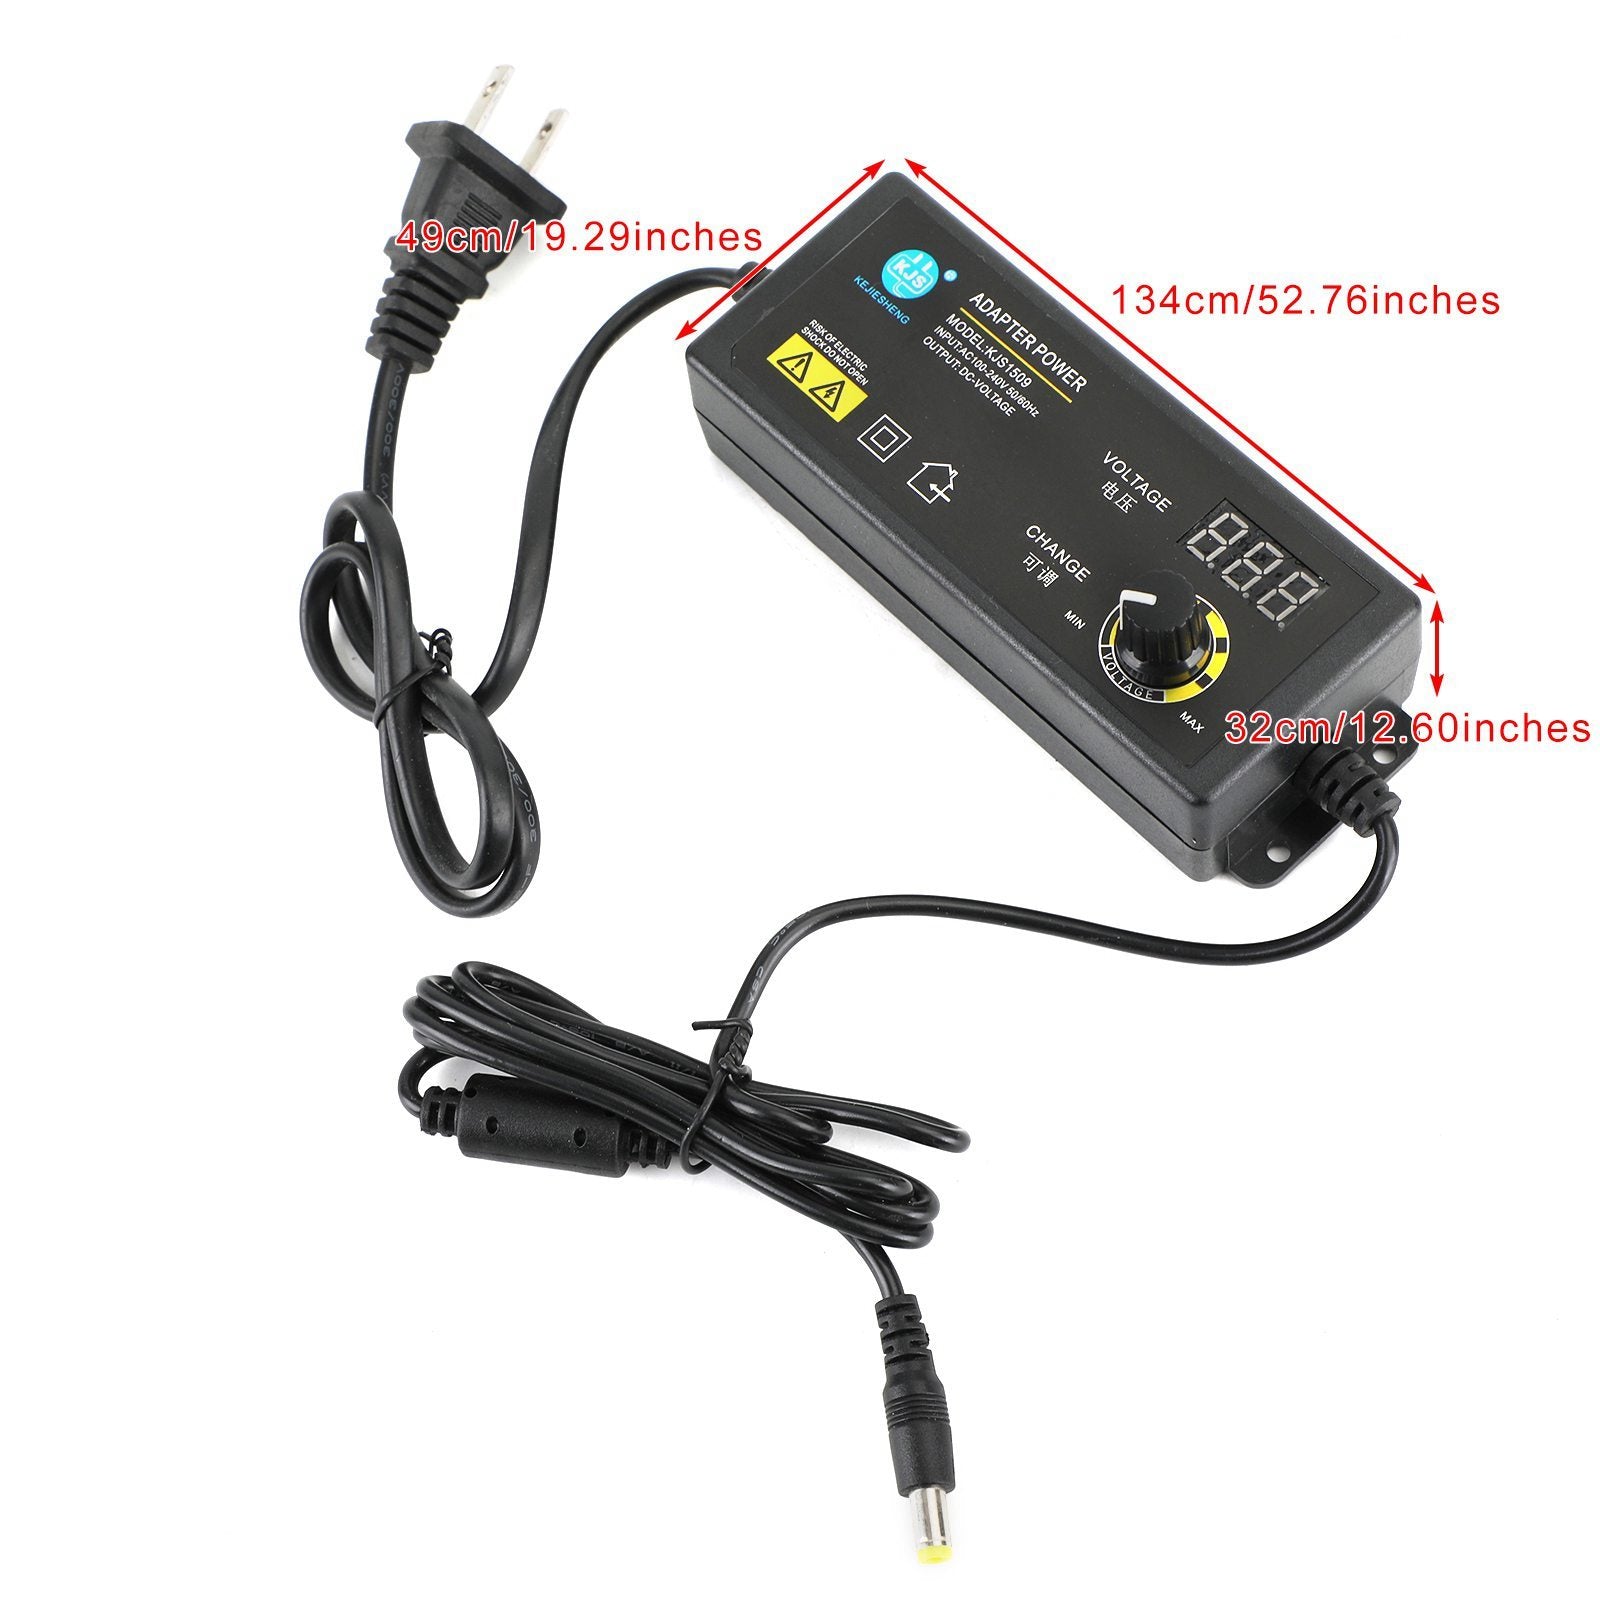 AC/DC 3V-24V Electrical Power Supply Adapter Charger Voltage Adjustable 1.5A